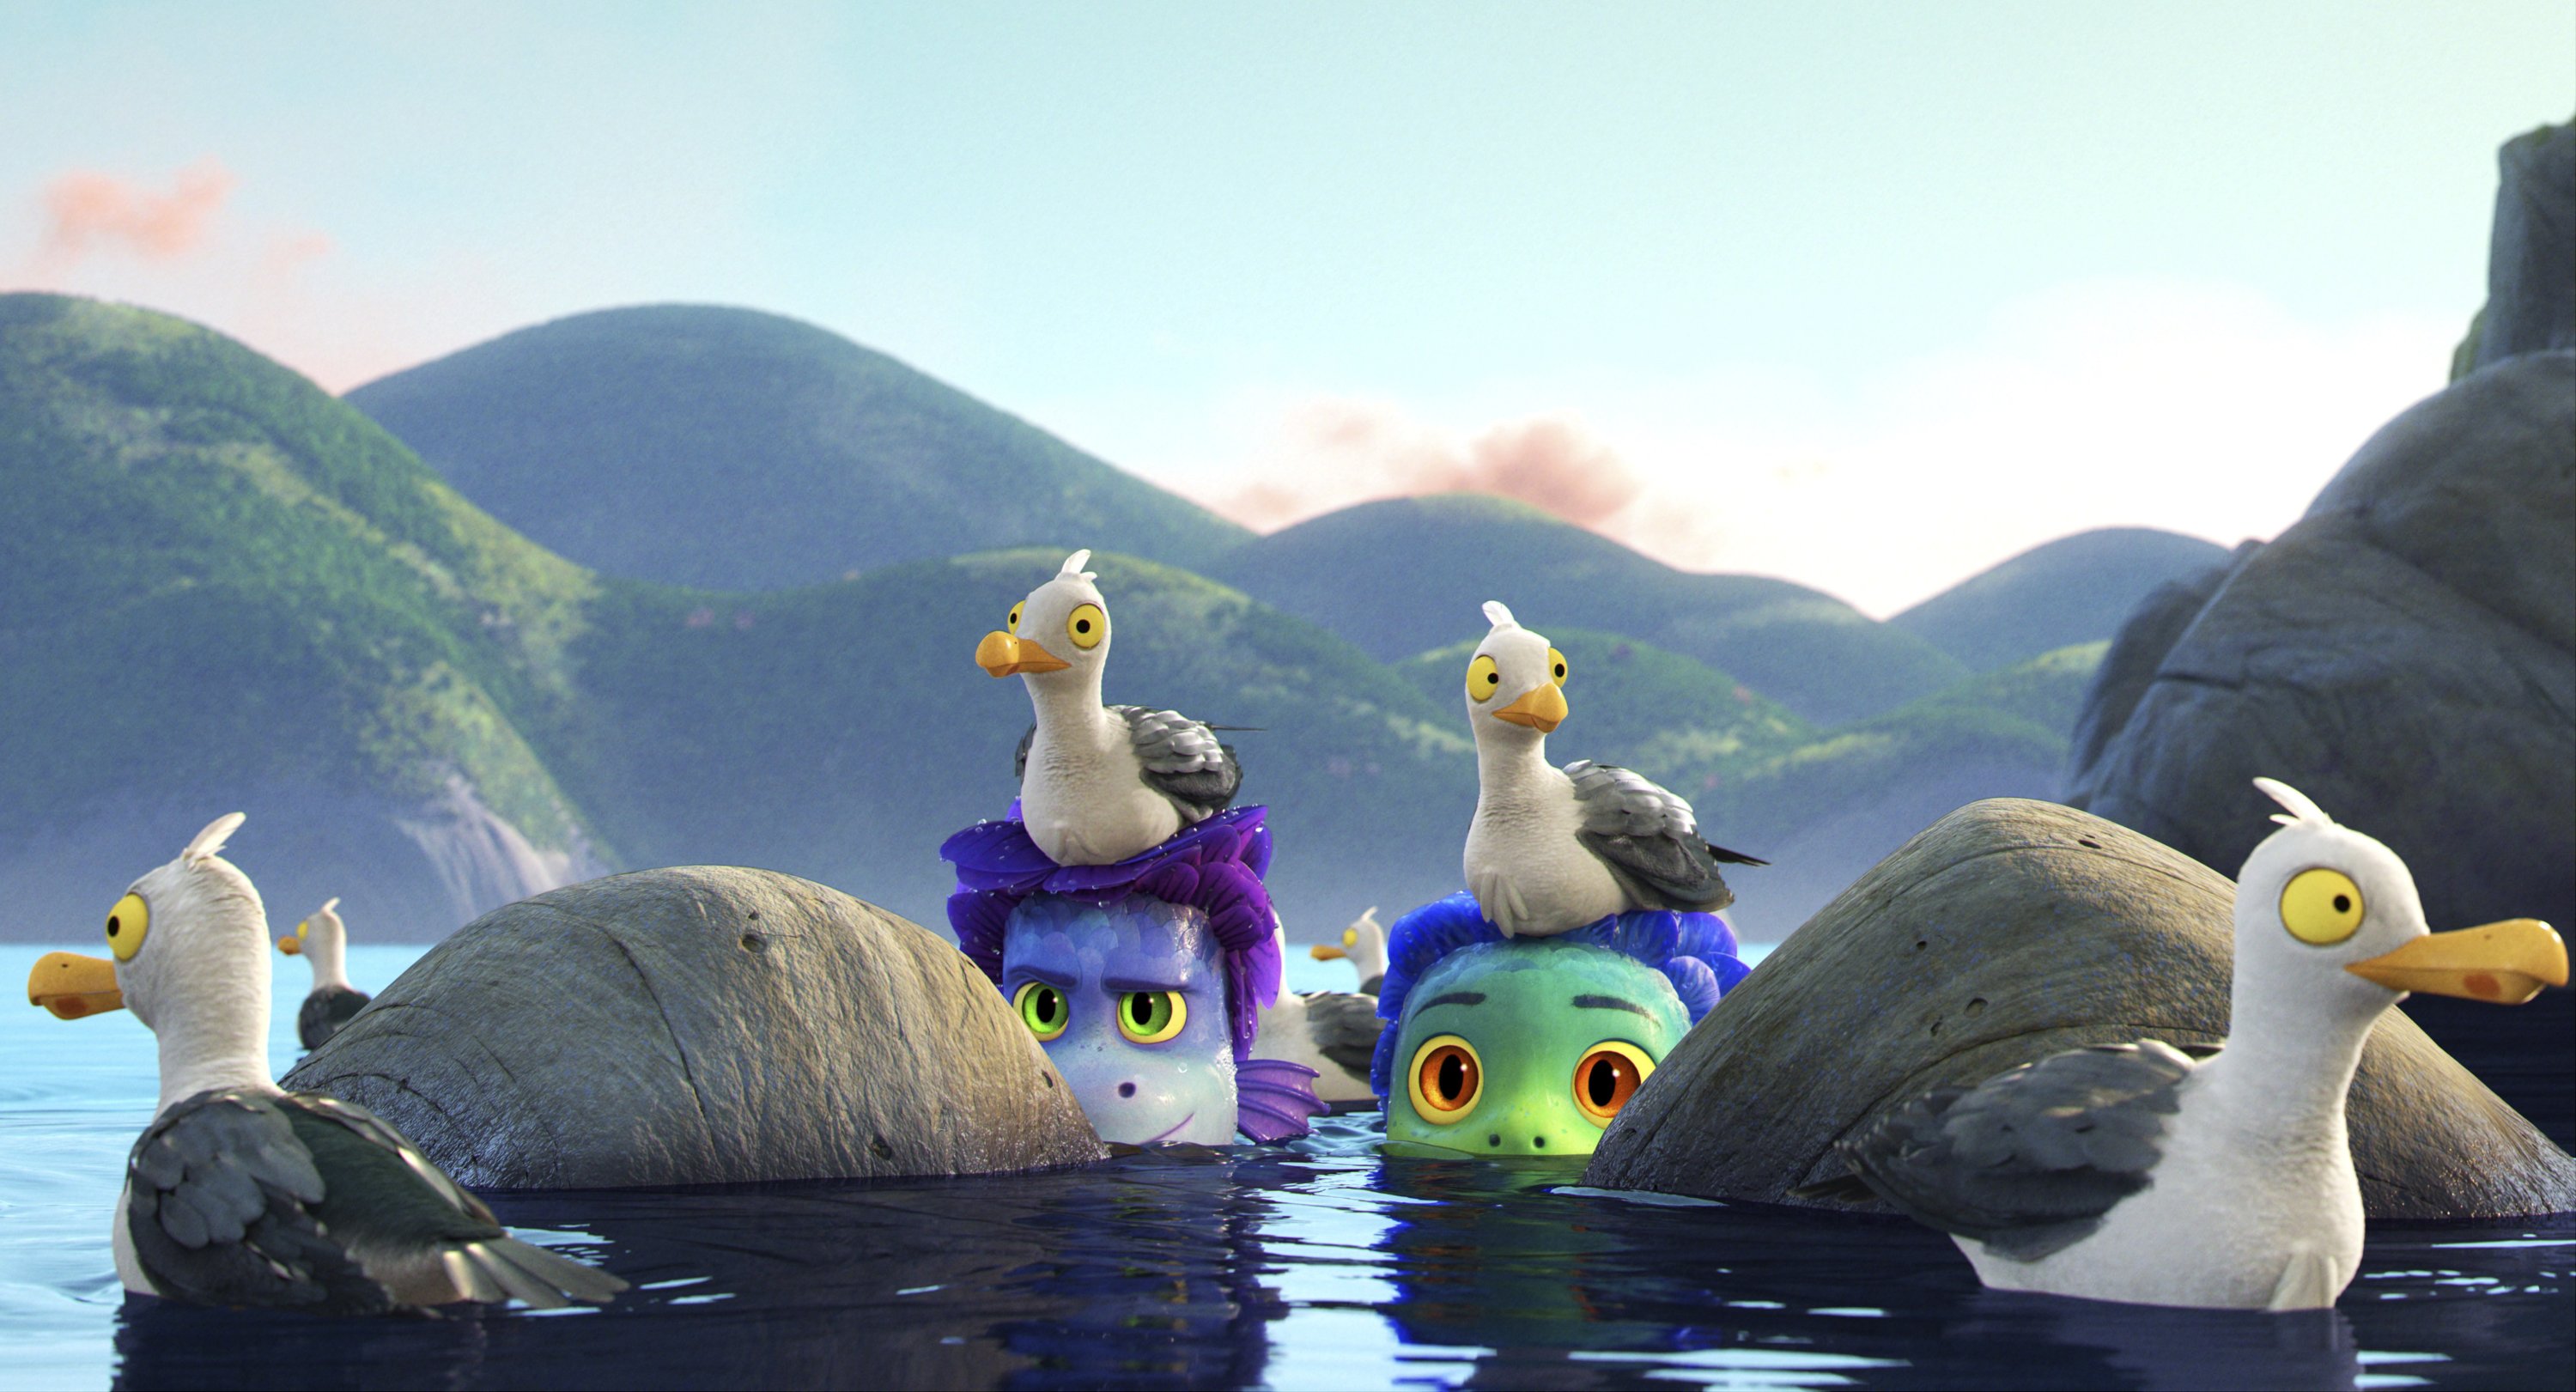 Alberto, voiced by Jack Dylan Grazer (C-L), and Luca, voiced by Jacob Tremblay (C-R), come out of the water as they are surrounded by seagulls in a scene from the animated film "Luca." (Photo by Disney via AP)